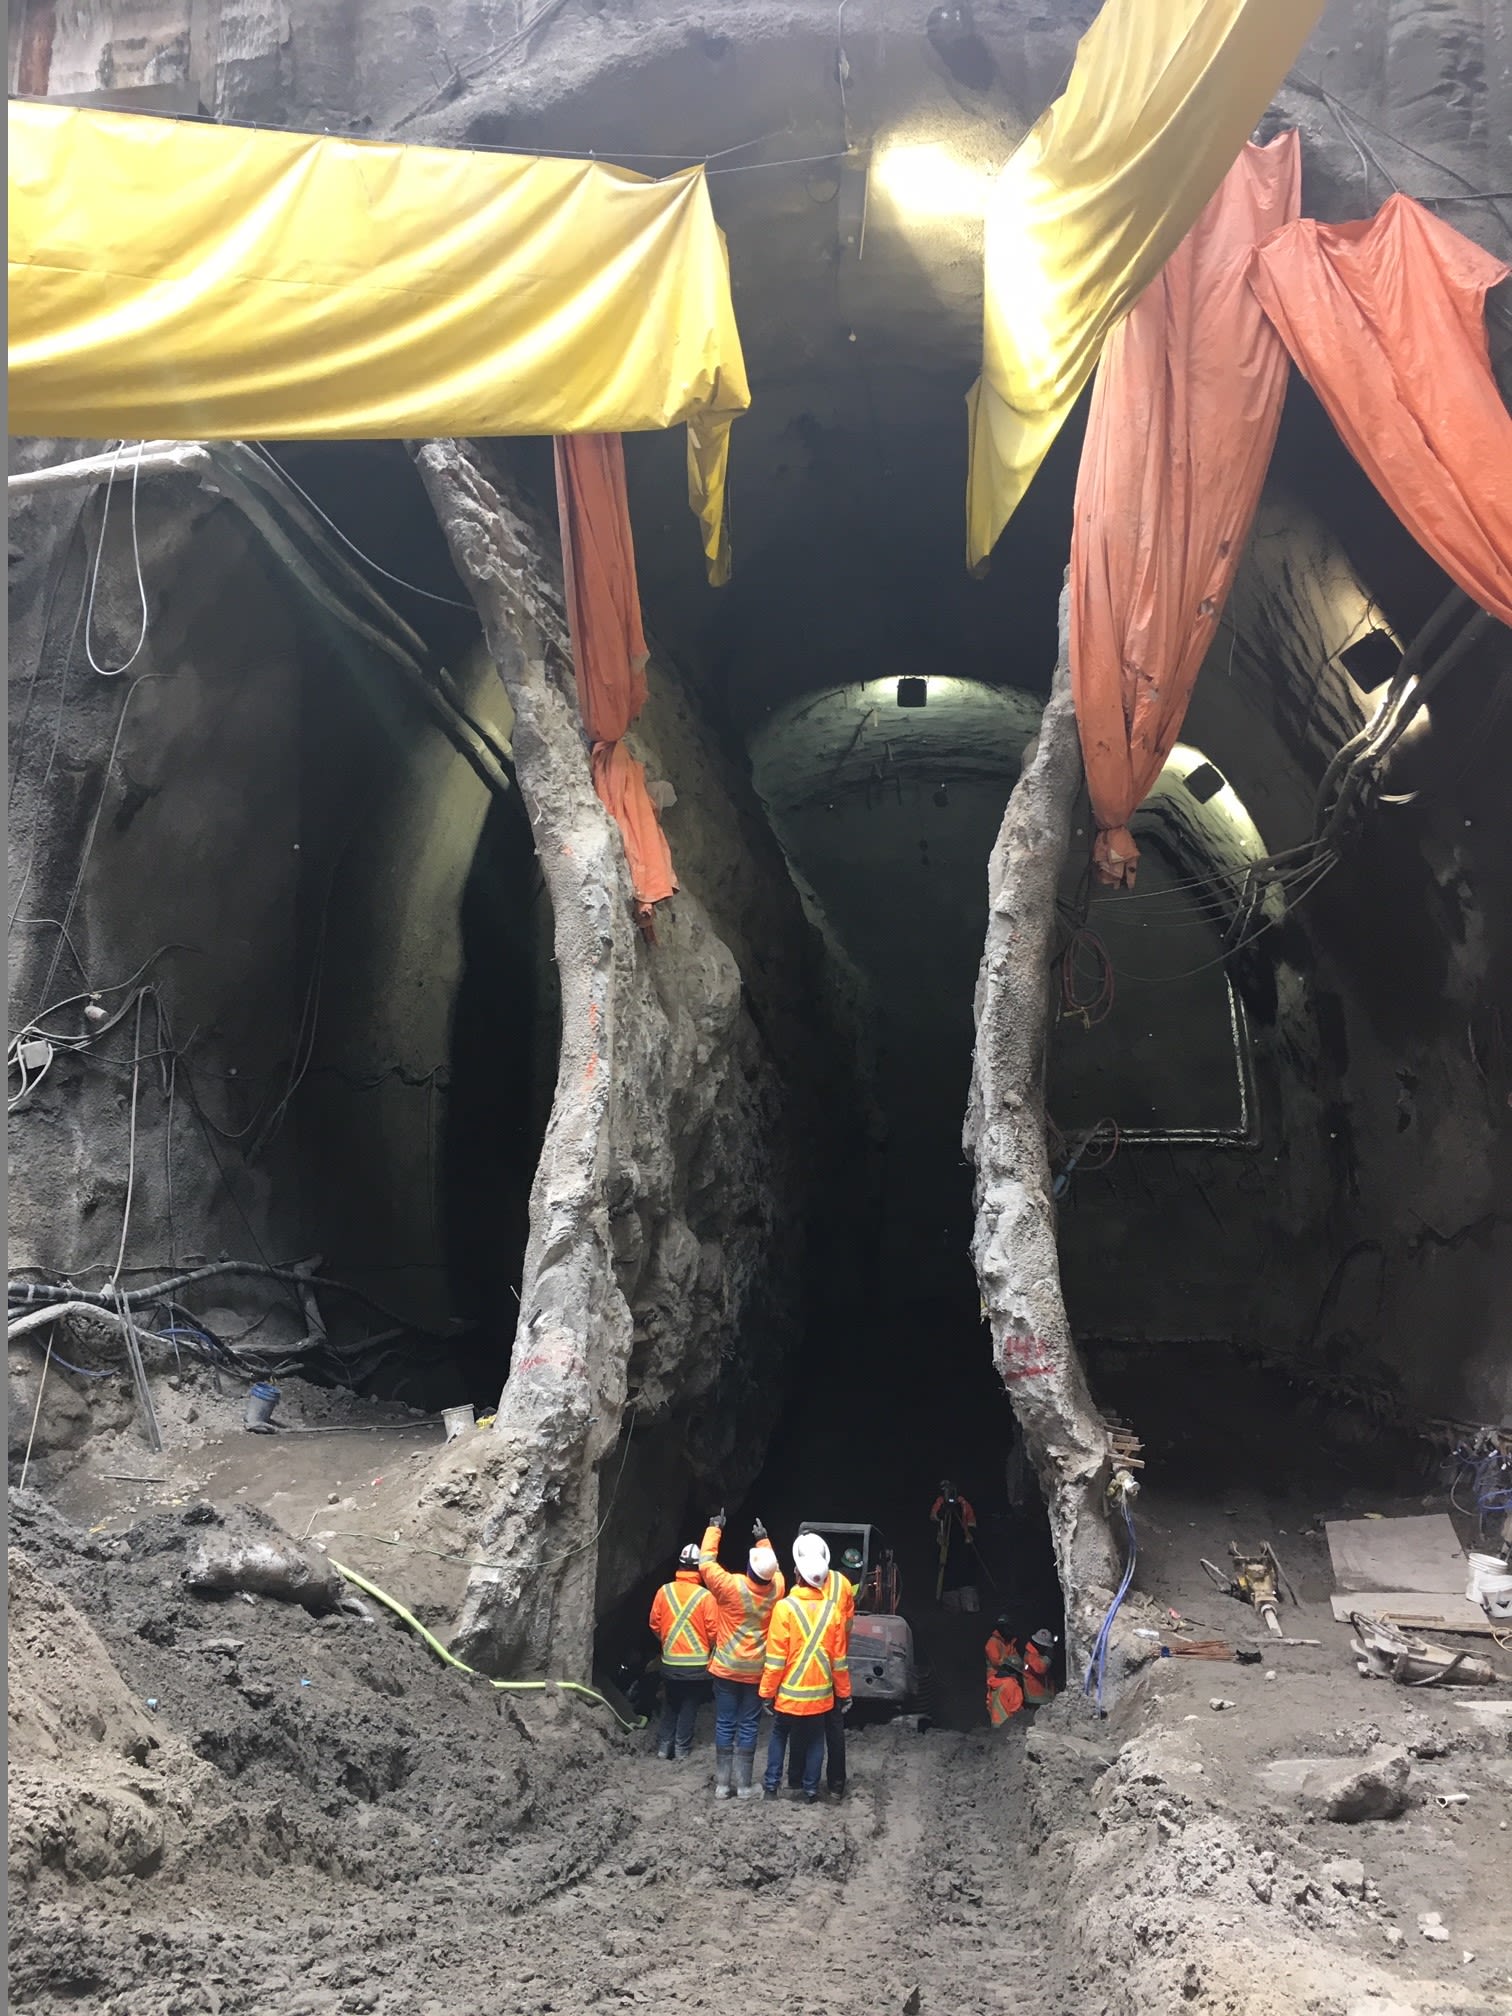 Work crews seem small as they stand at the bottom of the cave work and look up toward street level.